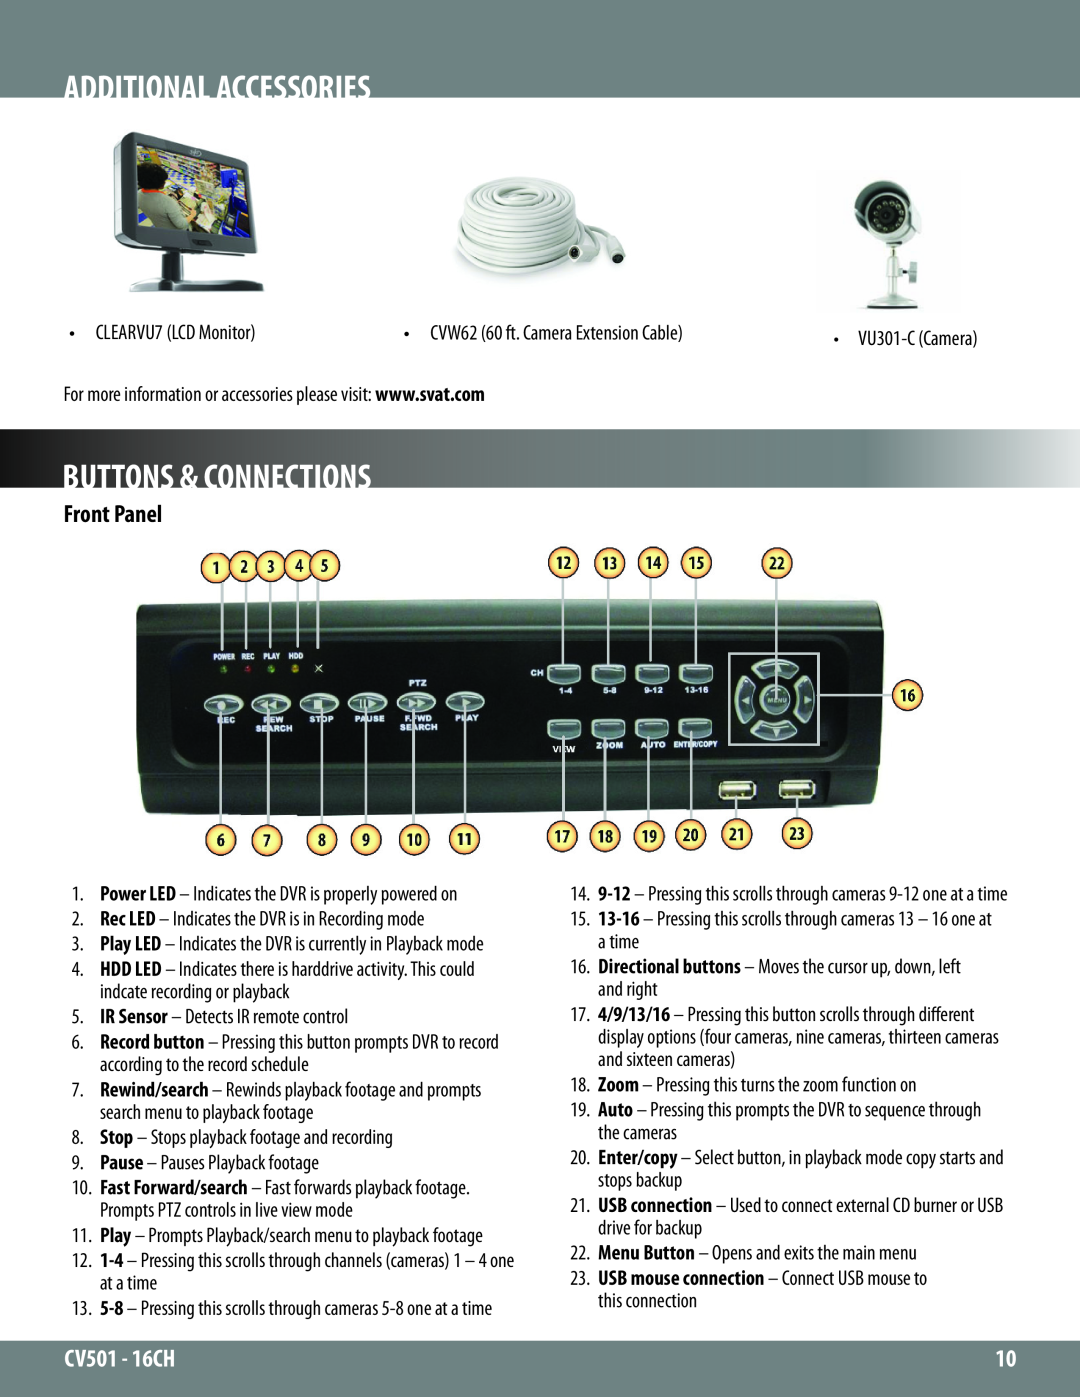 SVAT Electronics CV501 - 16CH instruction manual Additional Accessories, Buttons & Connections, Front Panel 